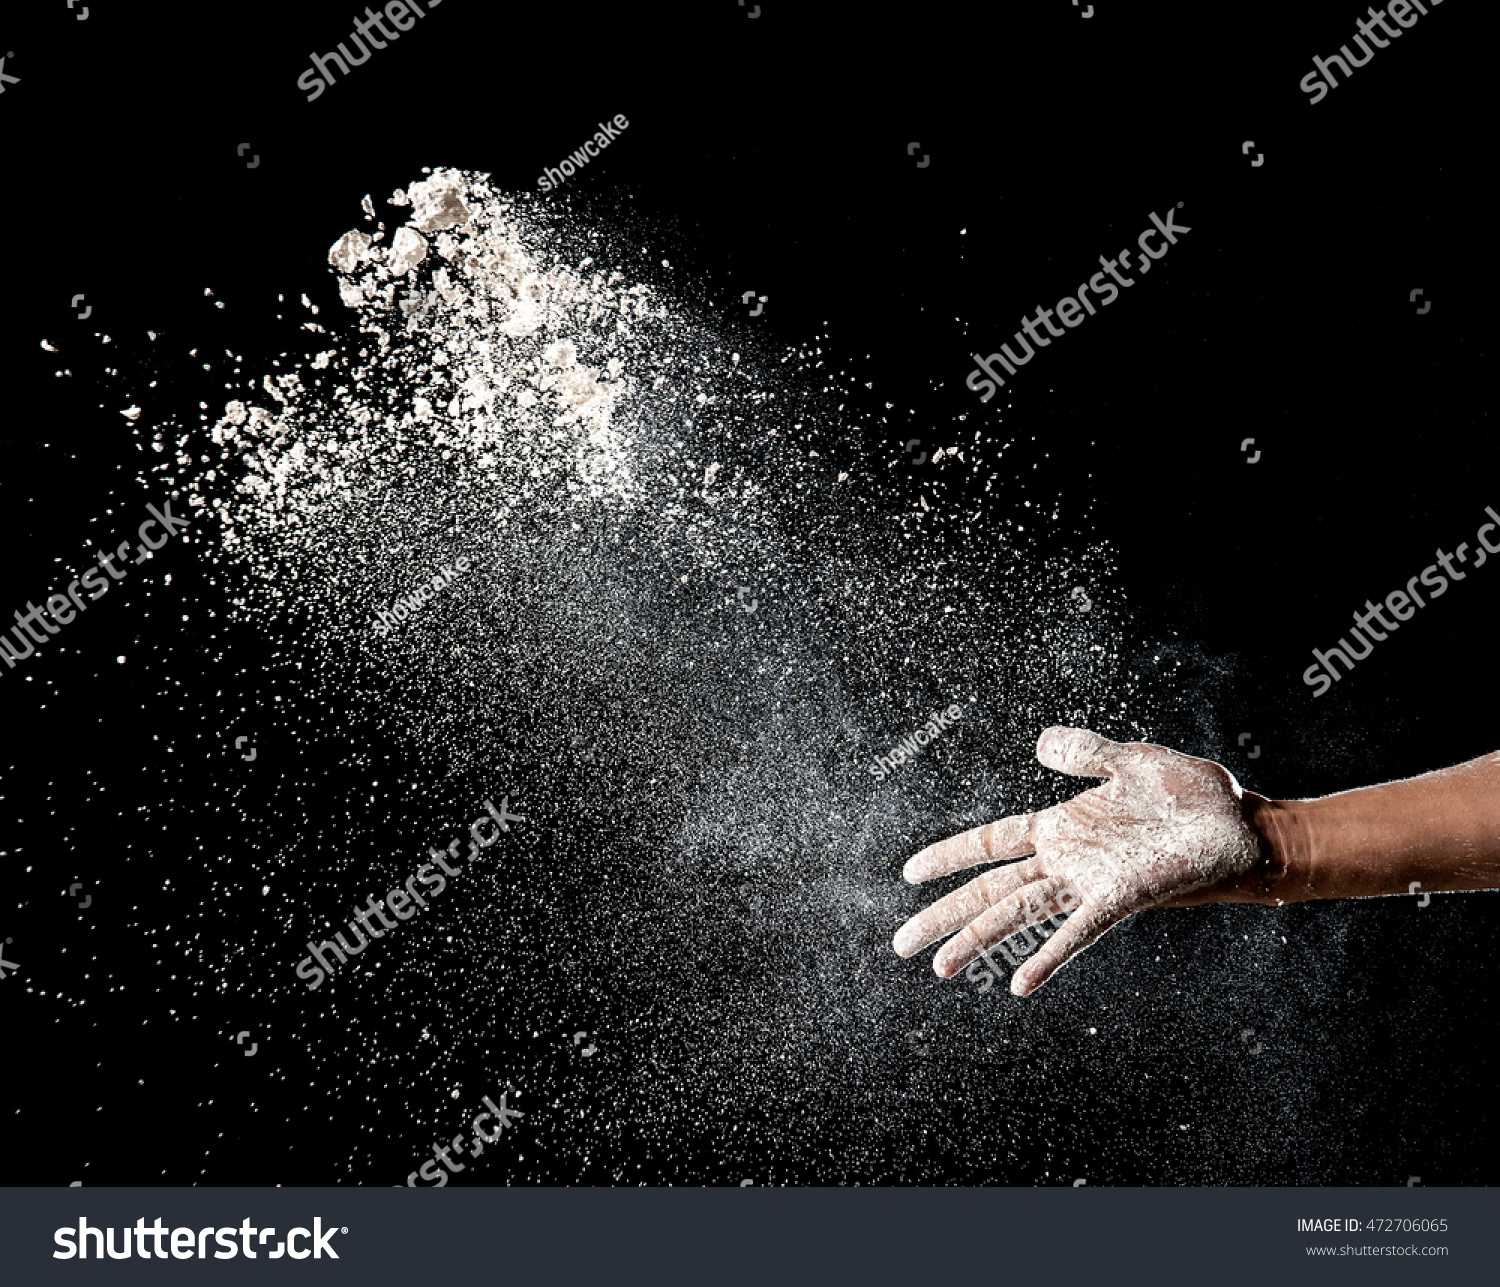 Hand and flour on black background #472706065